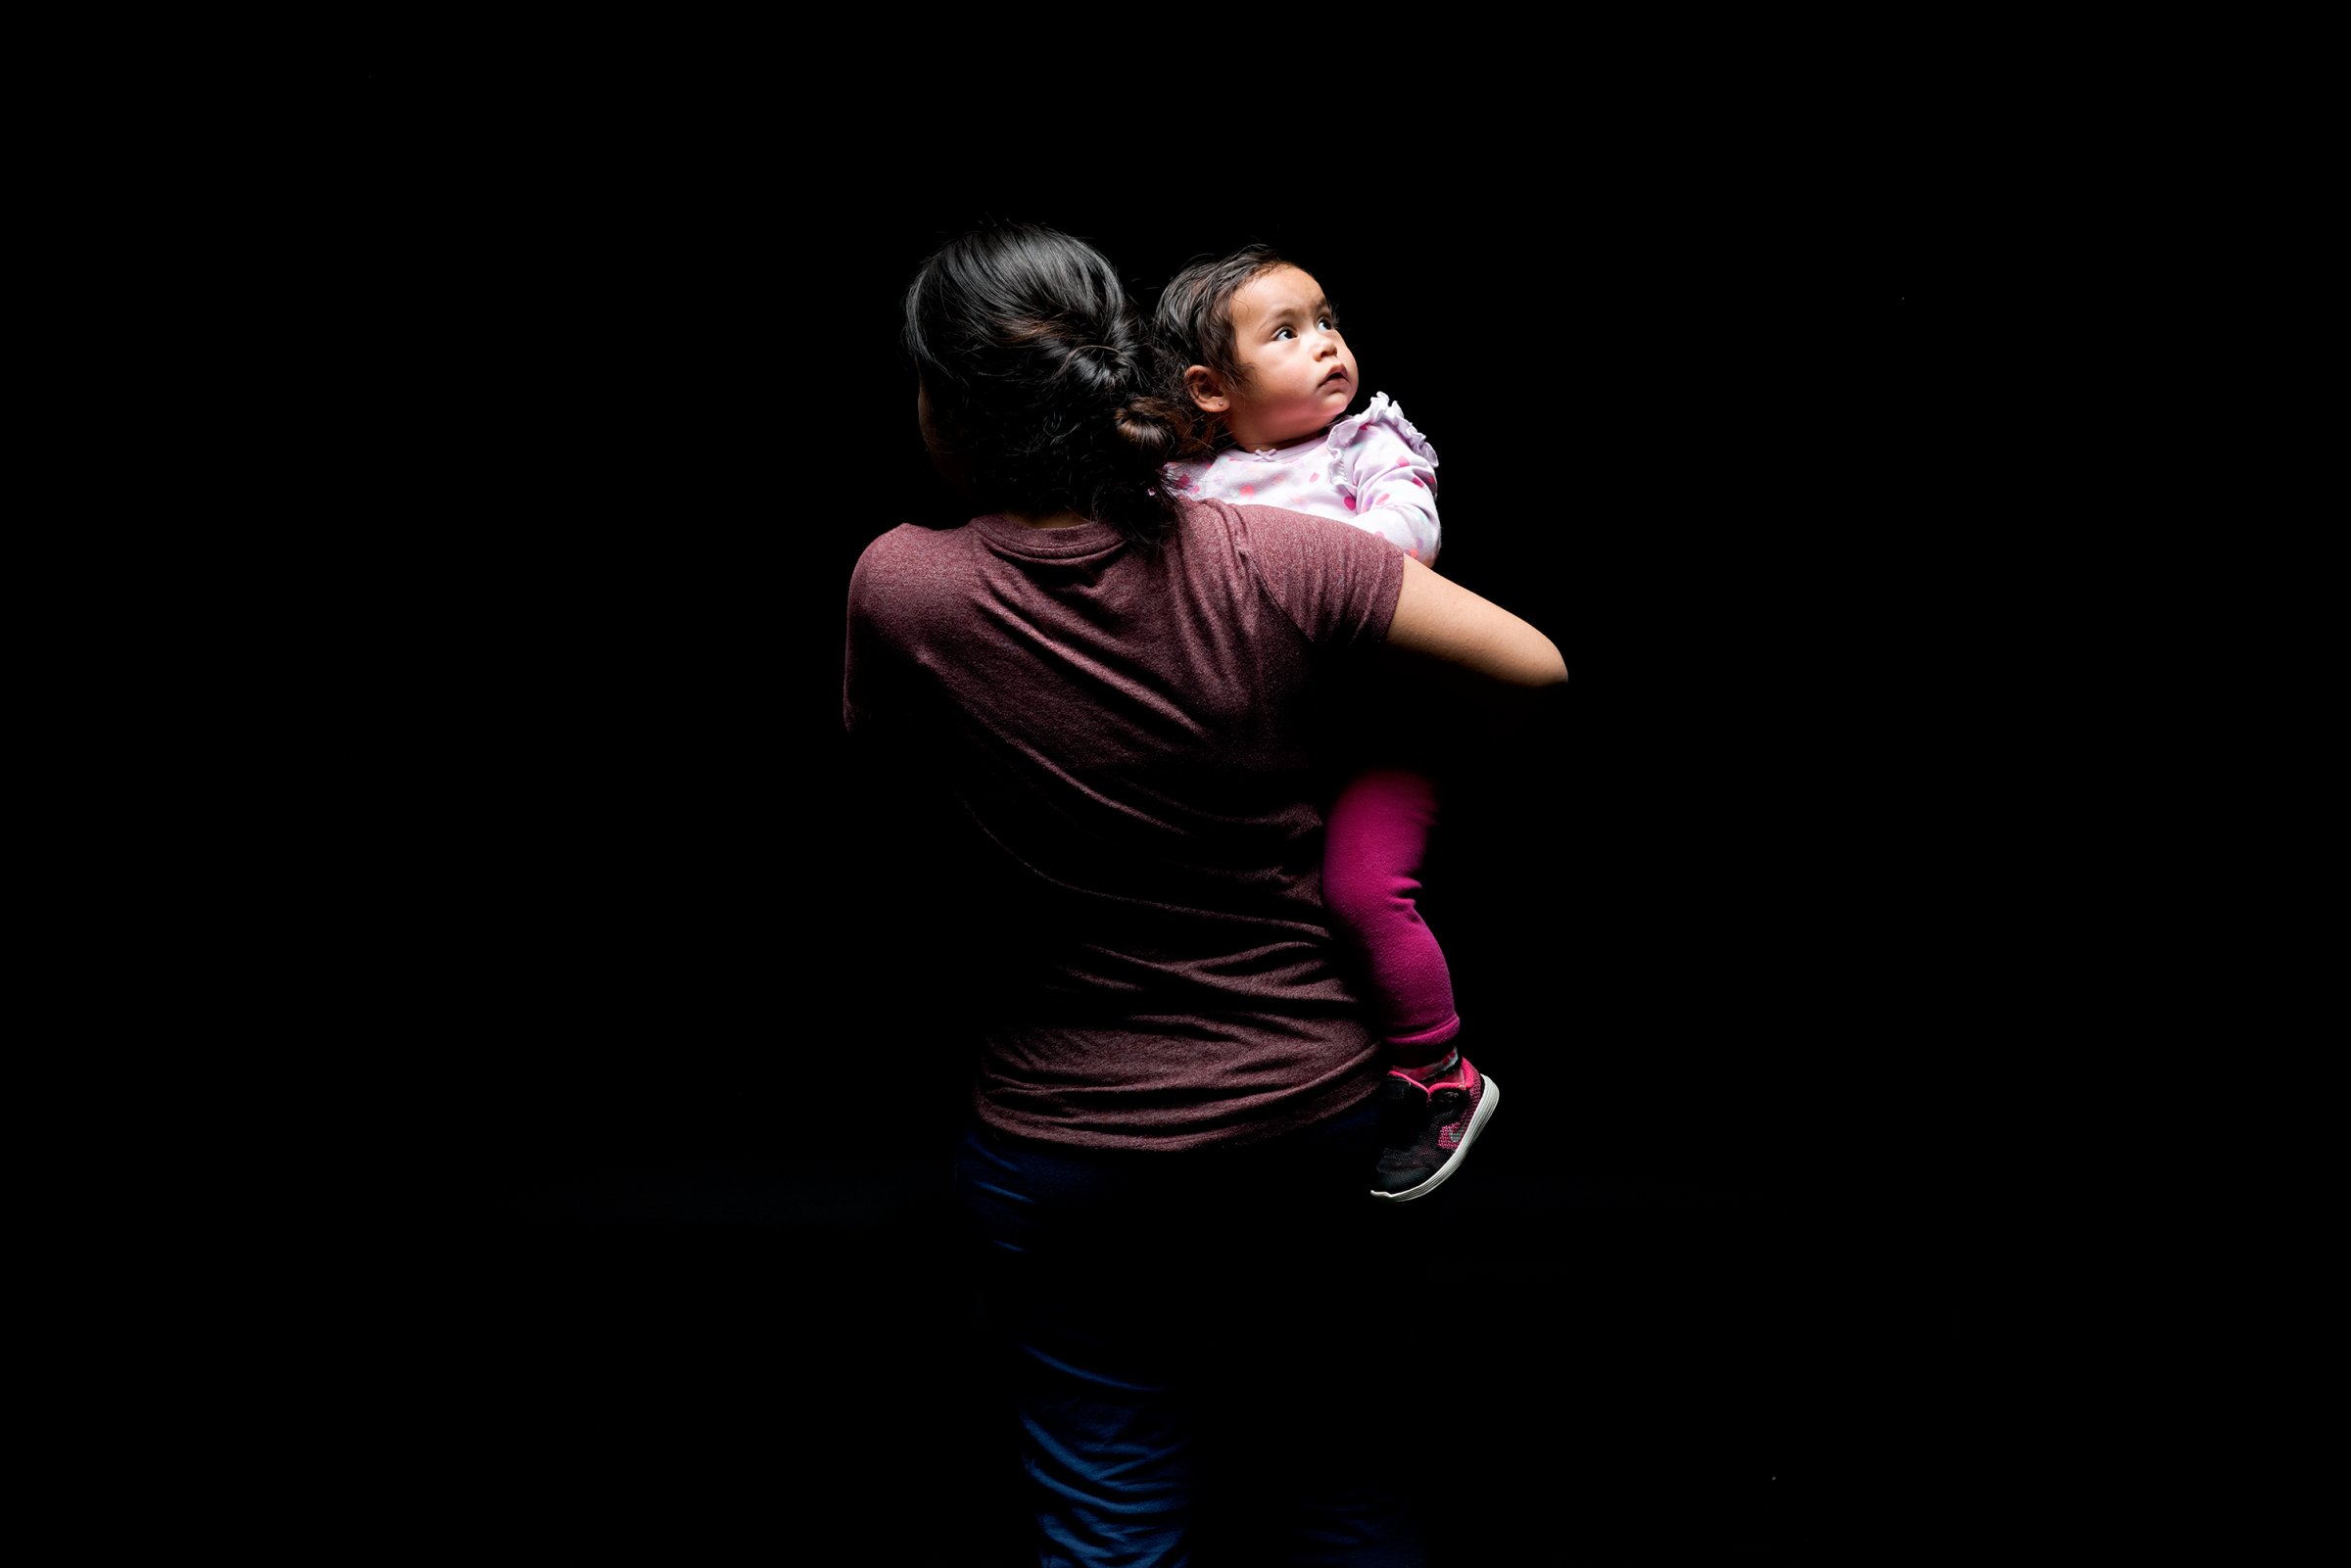 undocumented immigrants America U.S. immigration policy families family